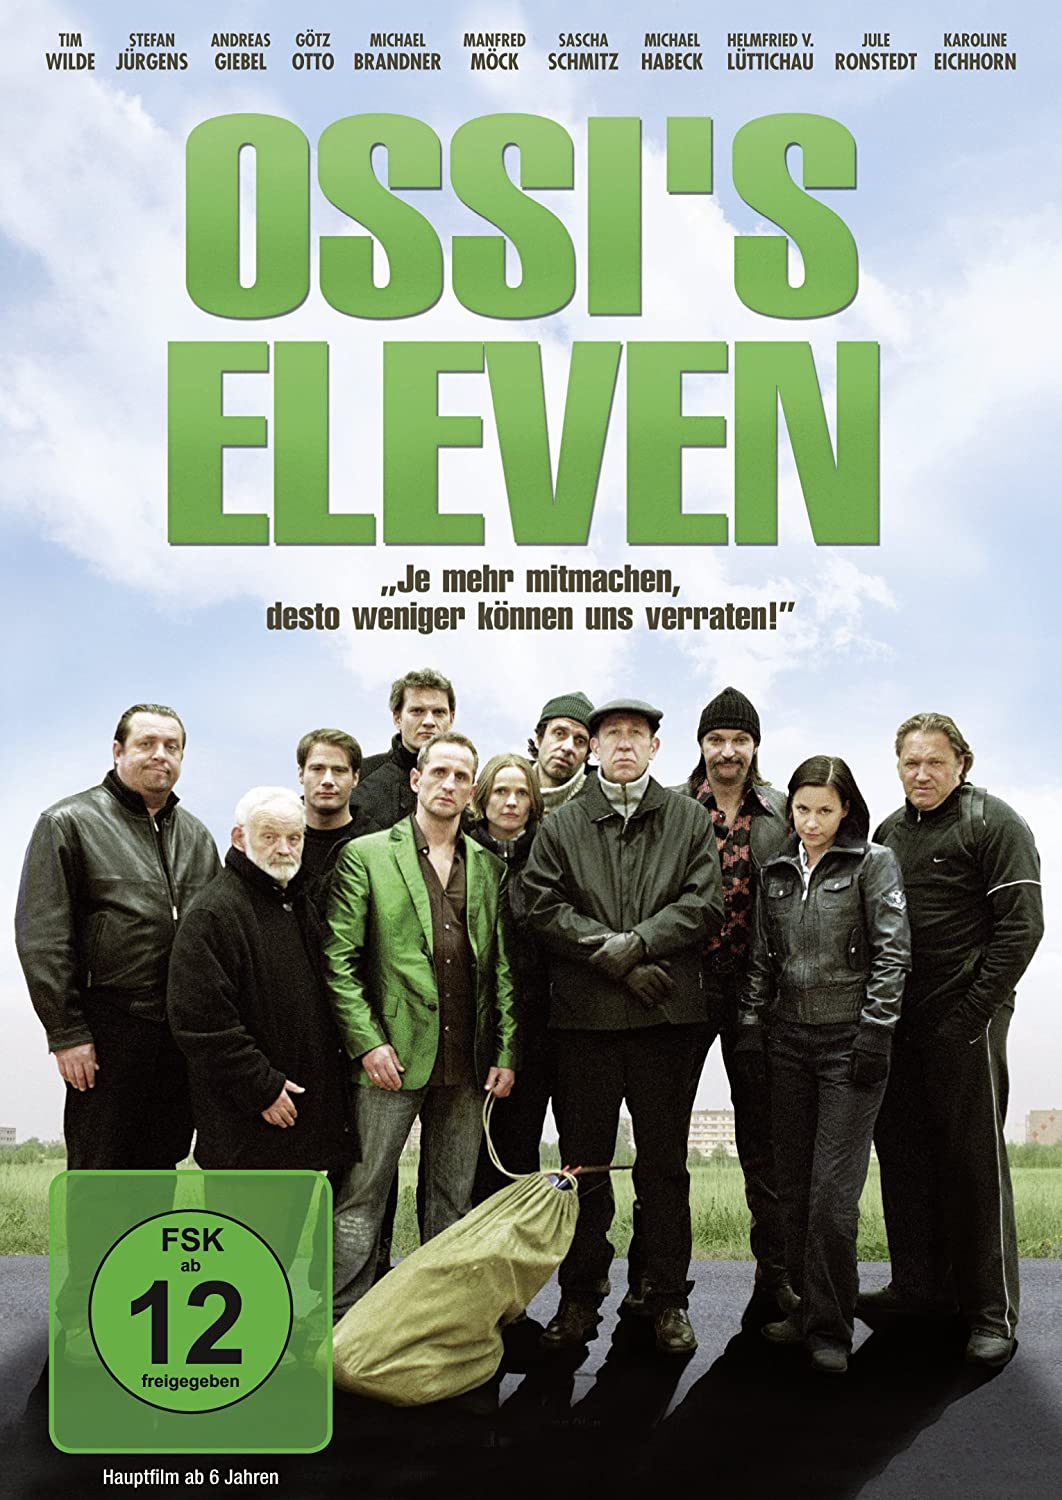 ossis eleven